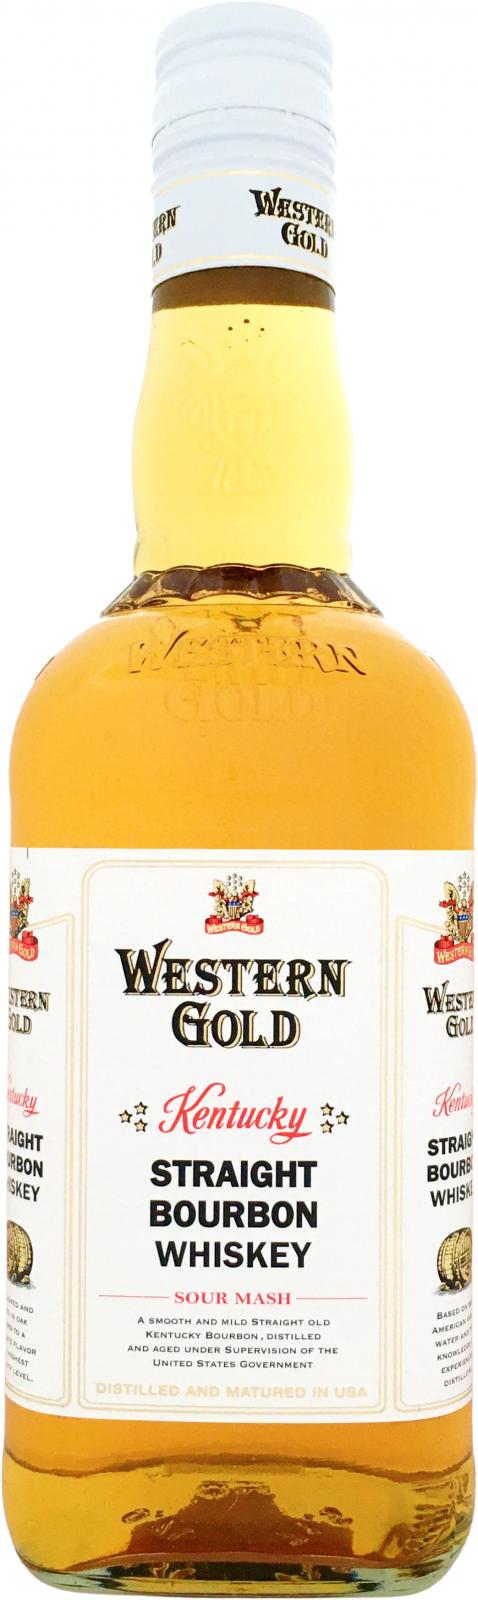 Whiskey Old Western Whiskybase Kentucky and - Bourbon Gold - Straight Ratings reviews